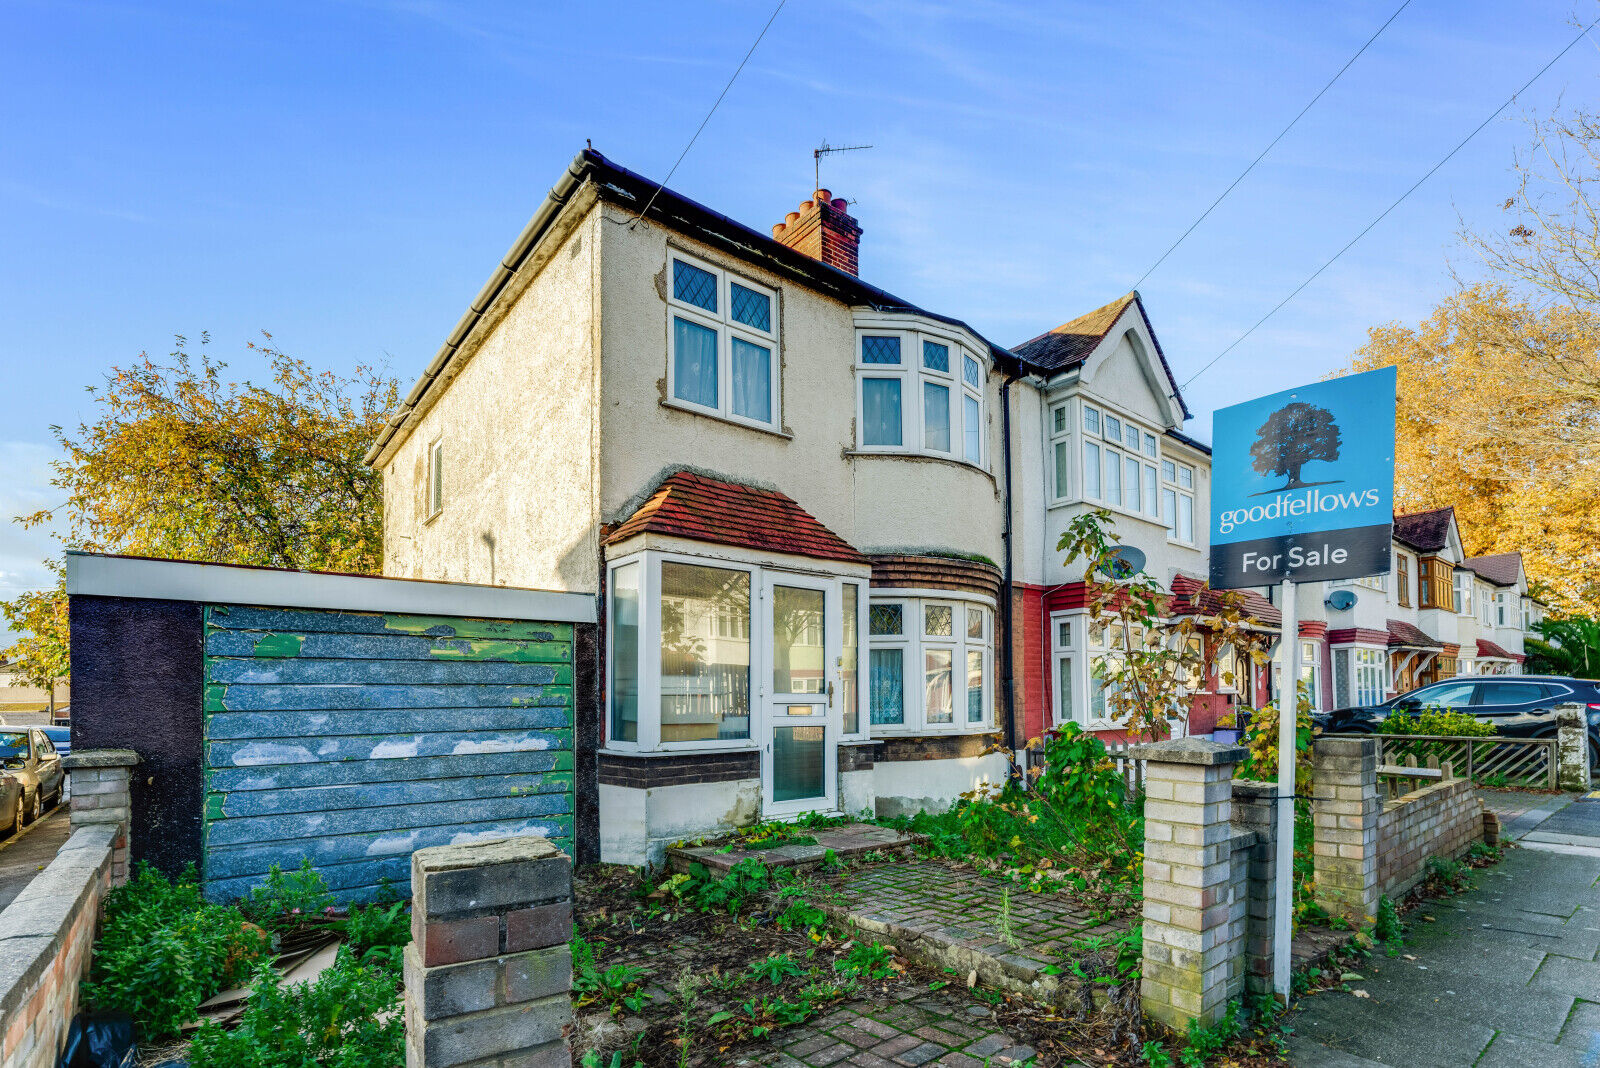 3 bedroom end terraced house for sale Glebe Path, Mitcham, CR4, main image